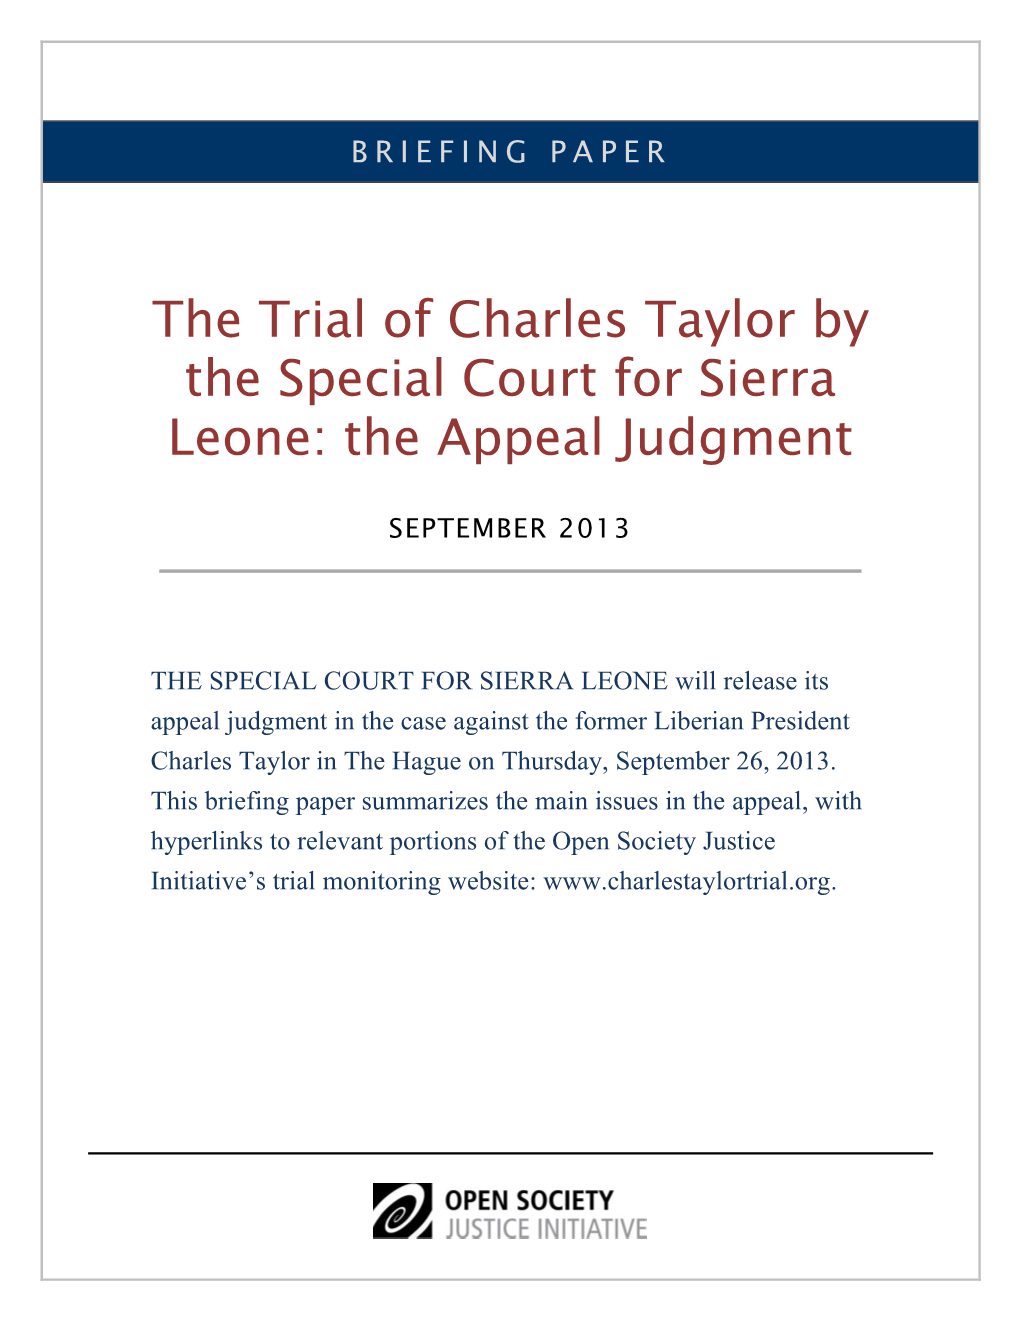 The Trial of Charles Taylor by the Special Court for Sierra Leone: the Appeal Judgment